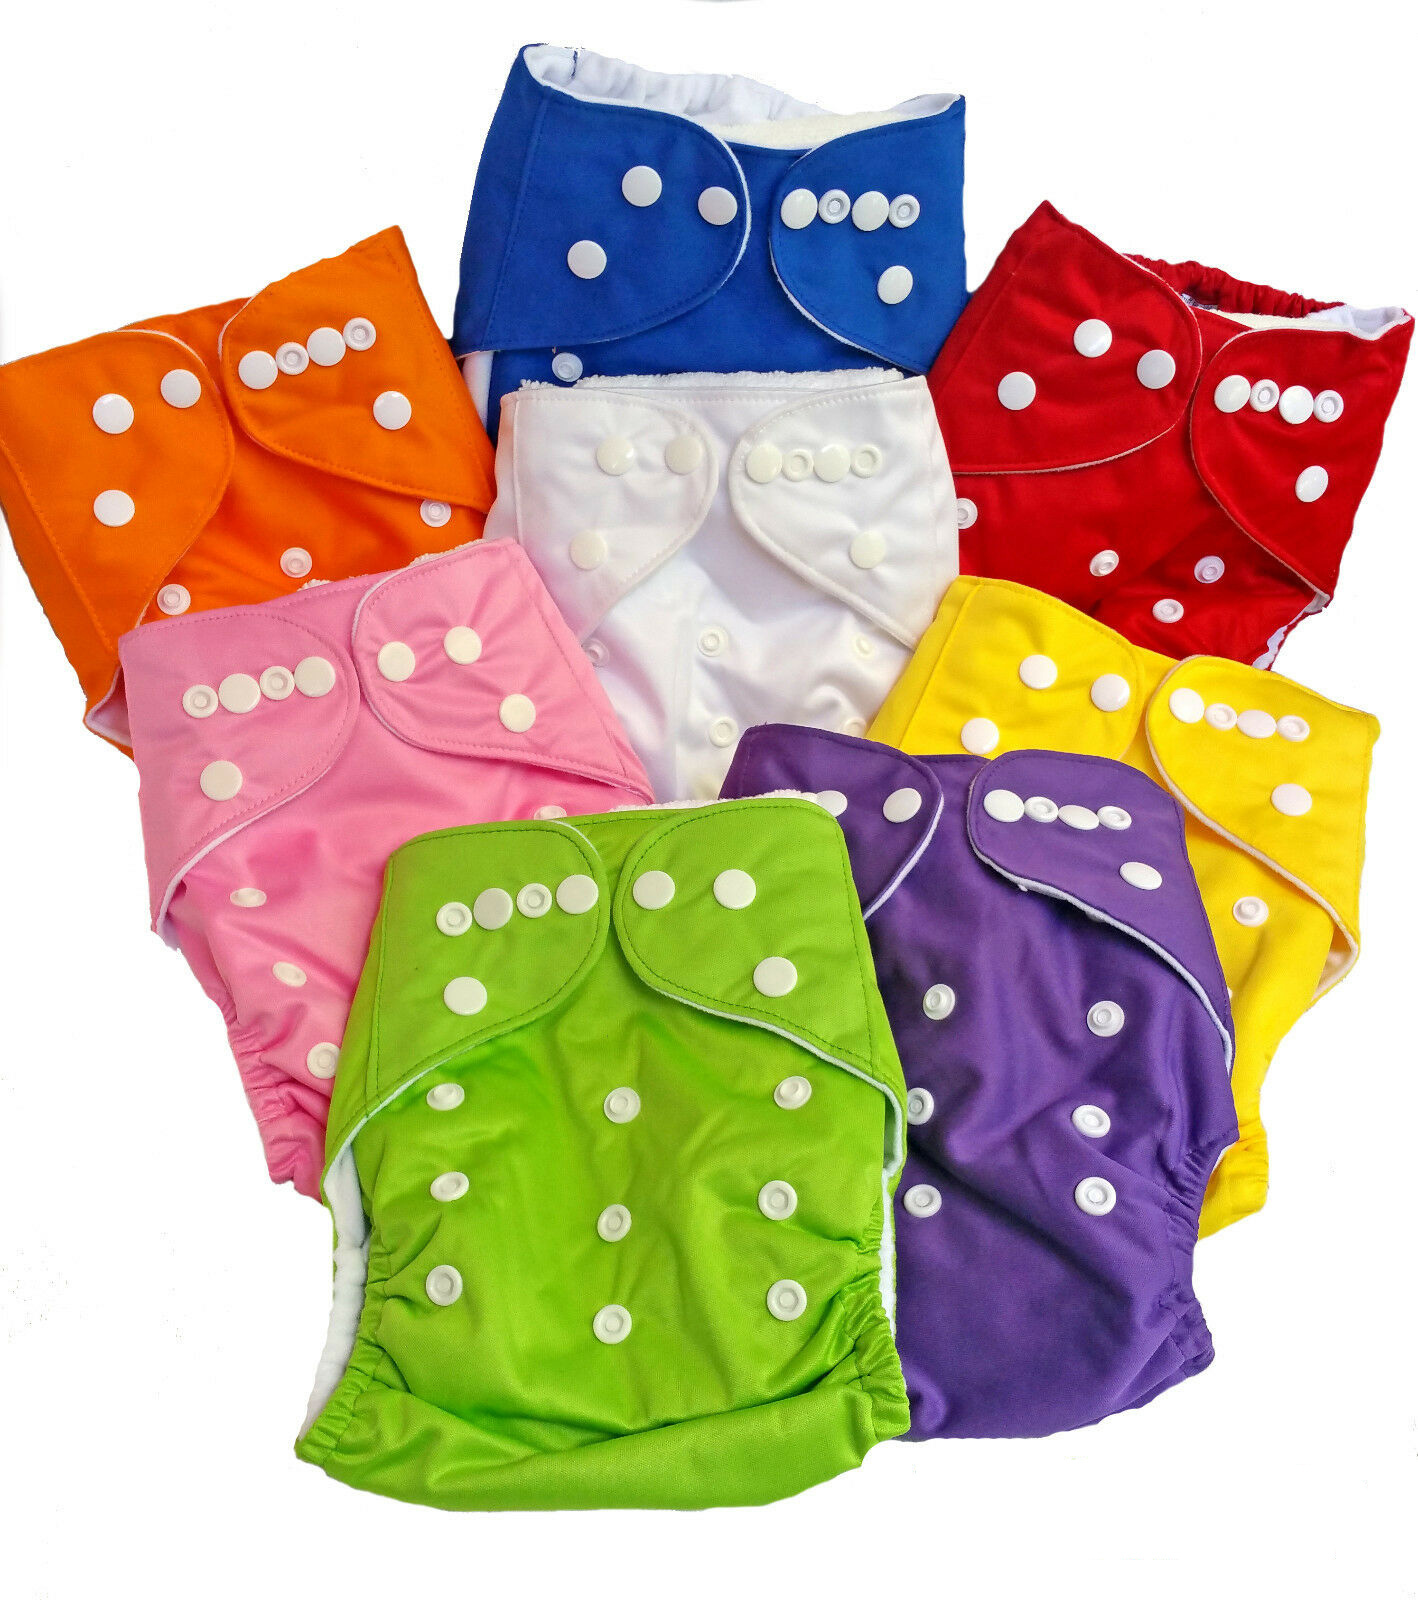 Display of Kindy Ecobaby's 10-Pack Cloth Nappies in various colors, complete with microfibre inserts, showcasing ease of use, adjustability, and eco-friendliness.